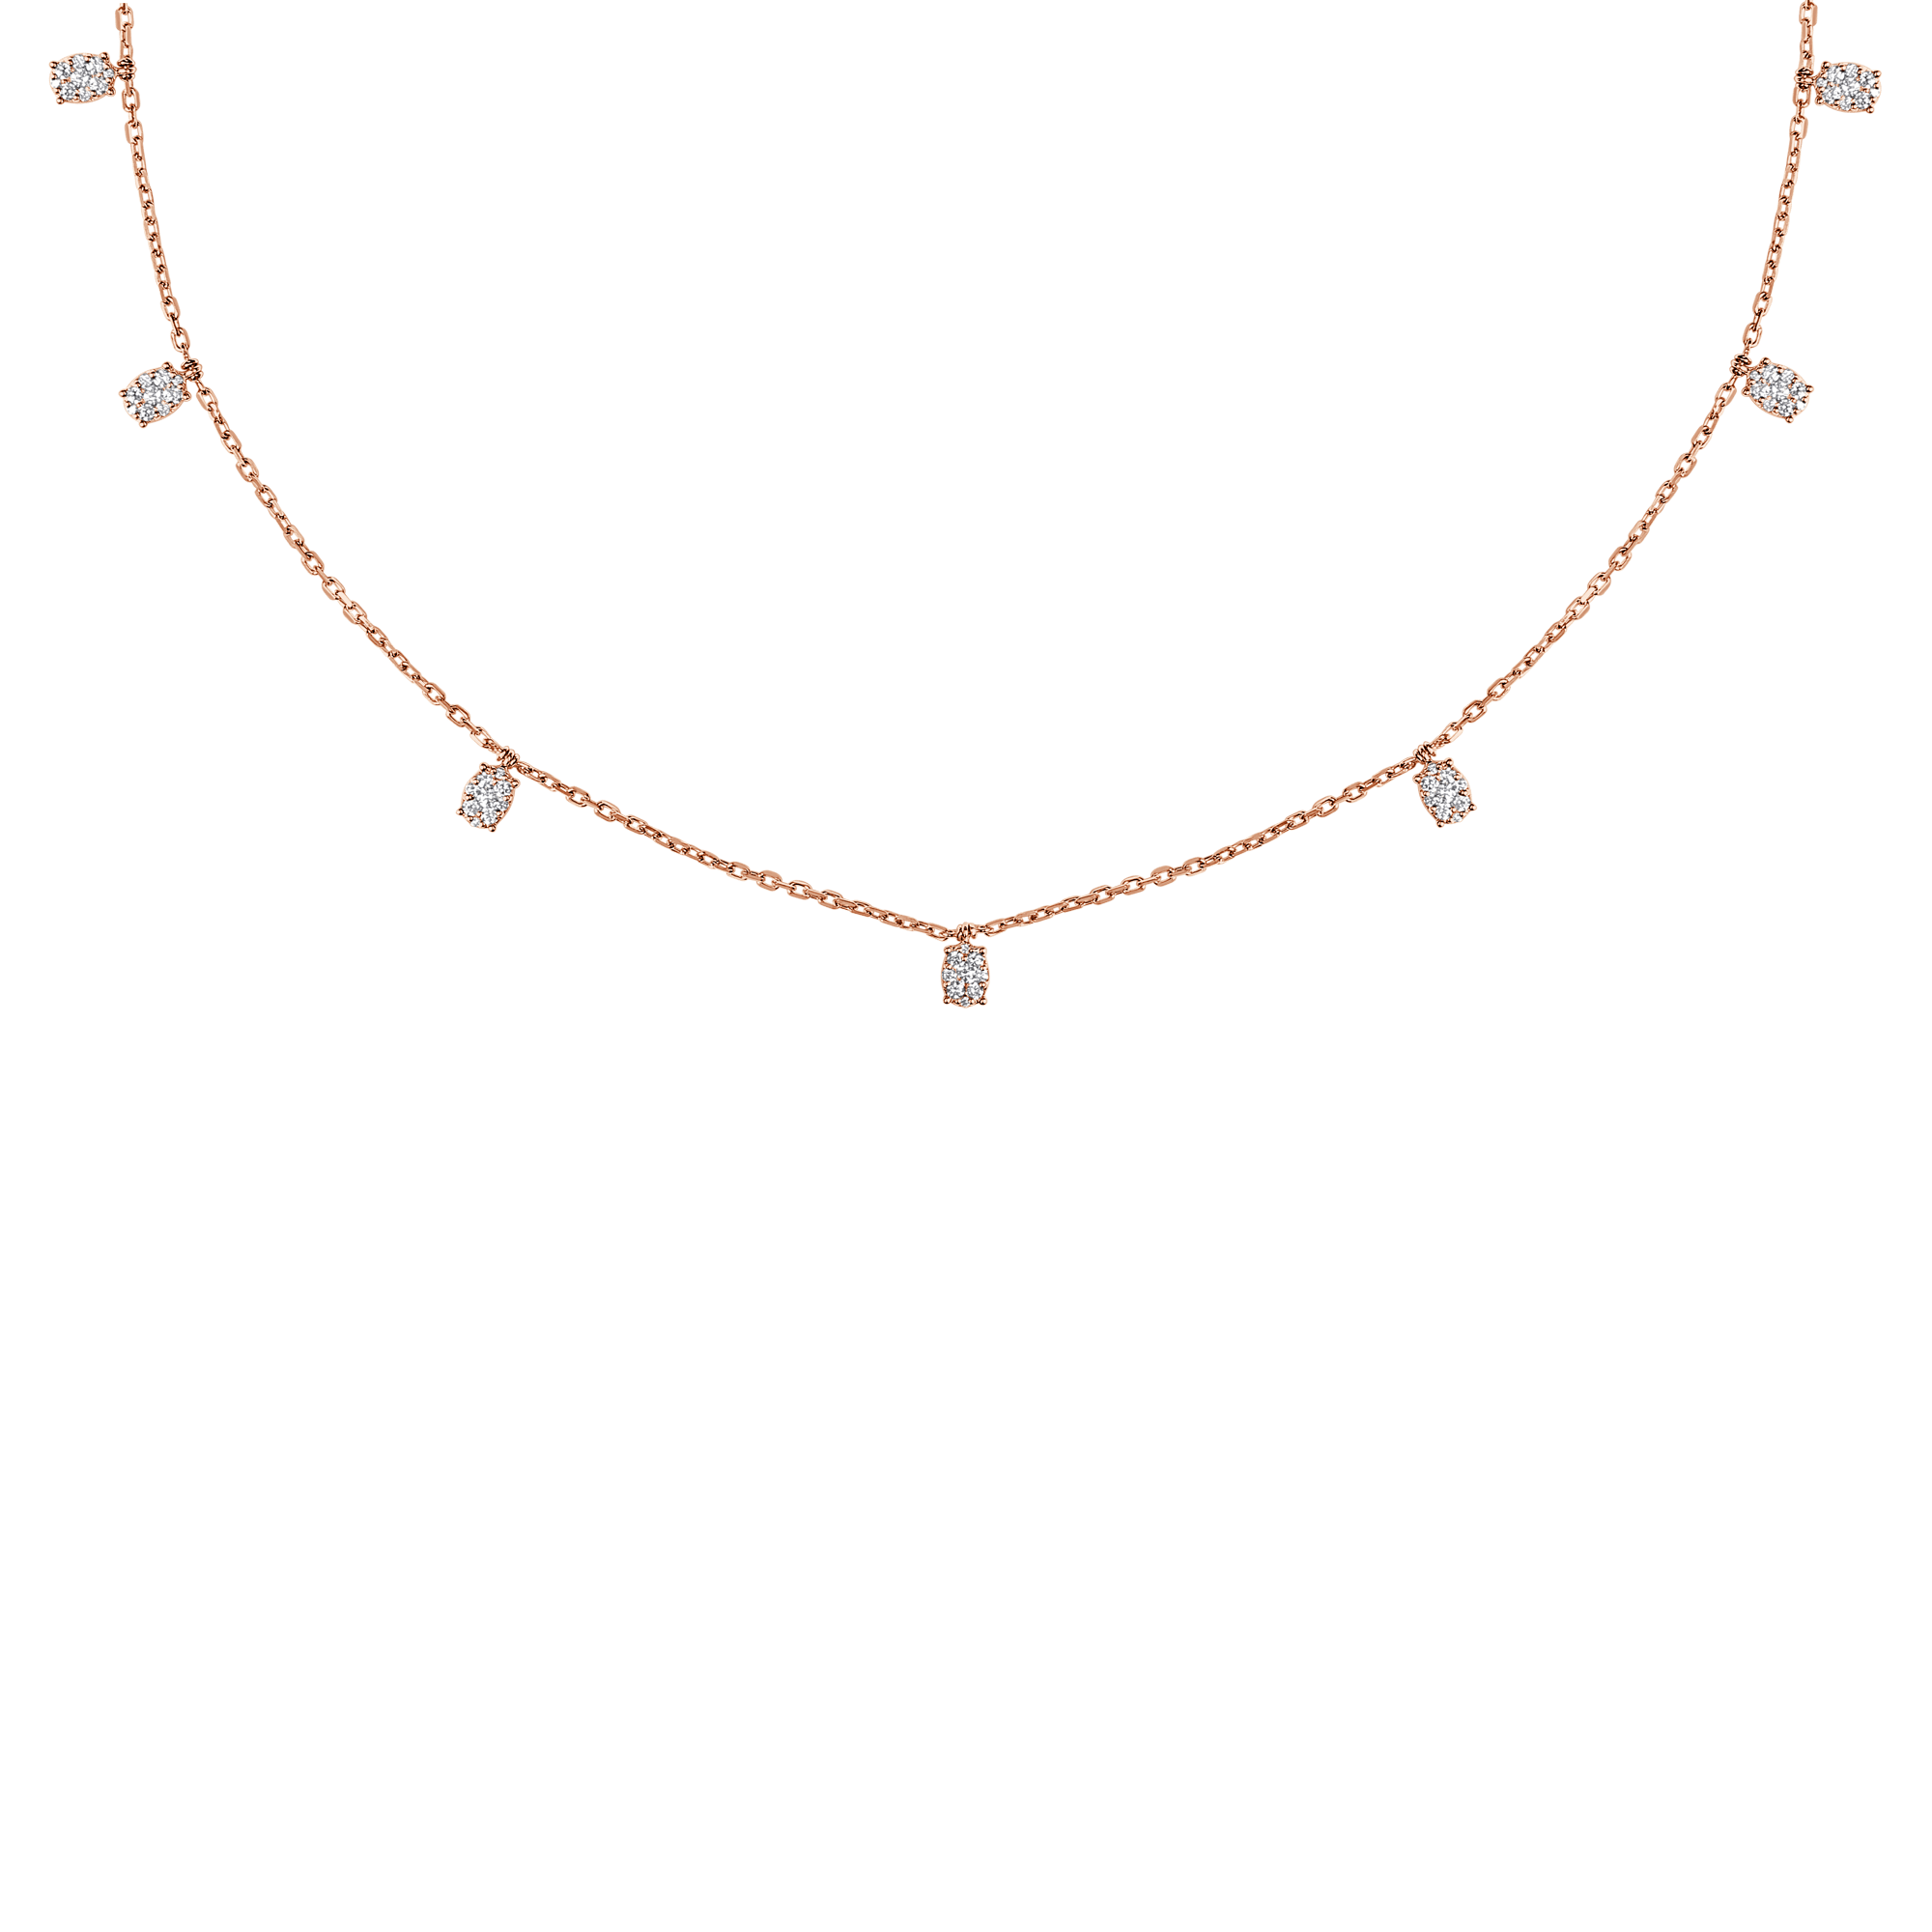 Seven Oval Illusion Diamond Necklace In 8 K Yellow Gold From Chokers Collection